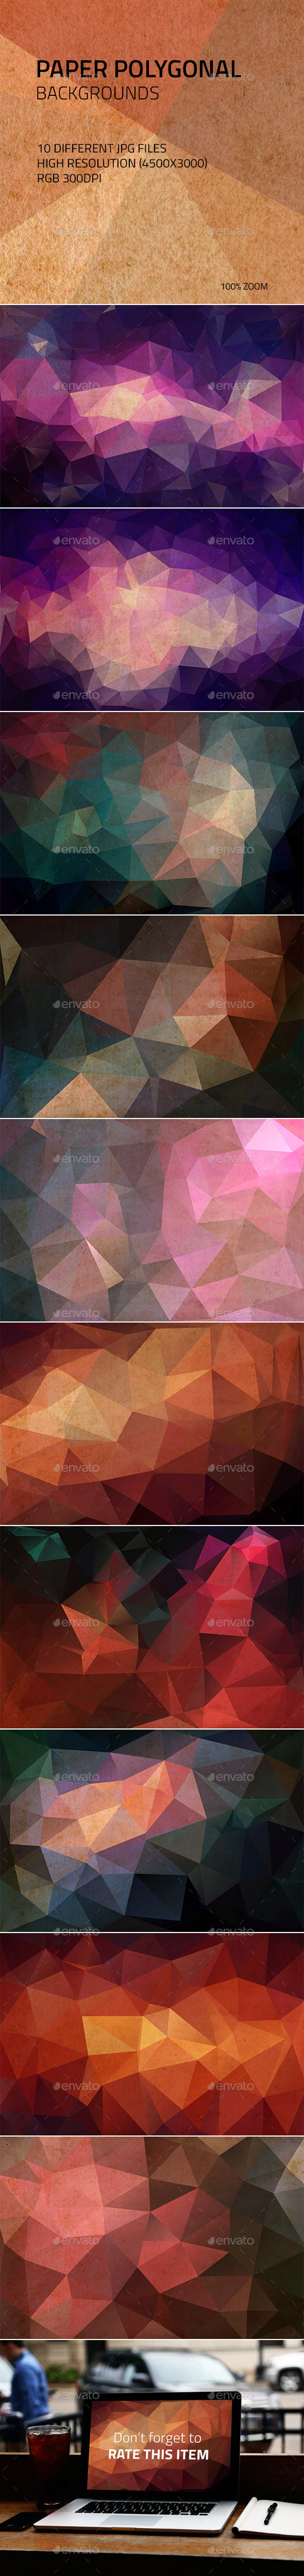 Paper Polygonal Backgrounds